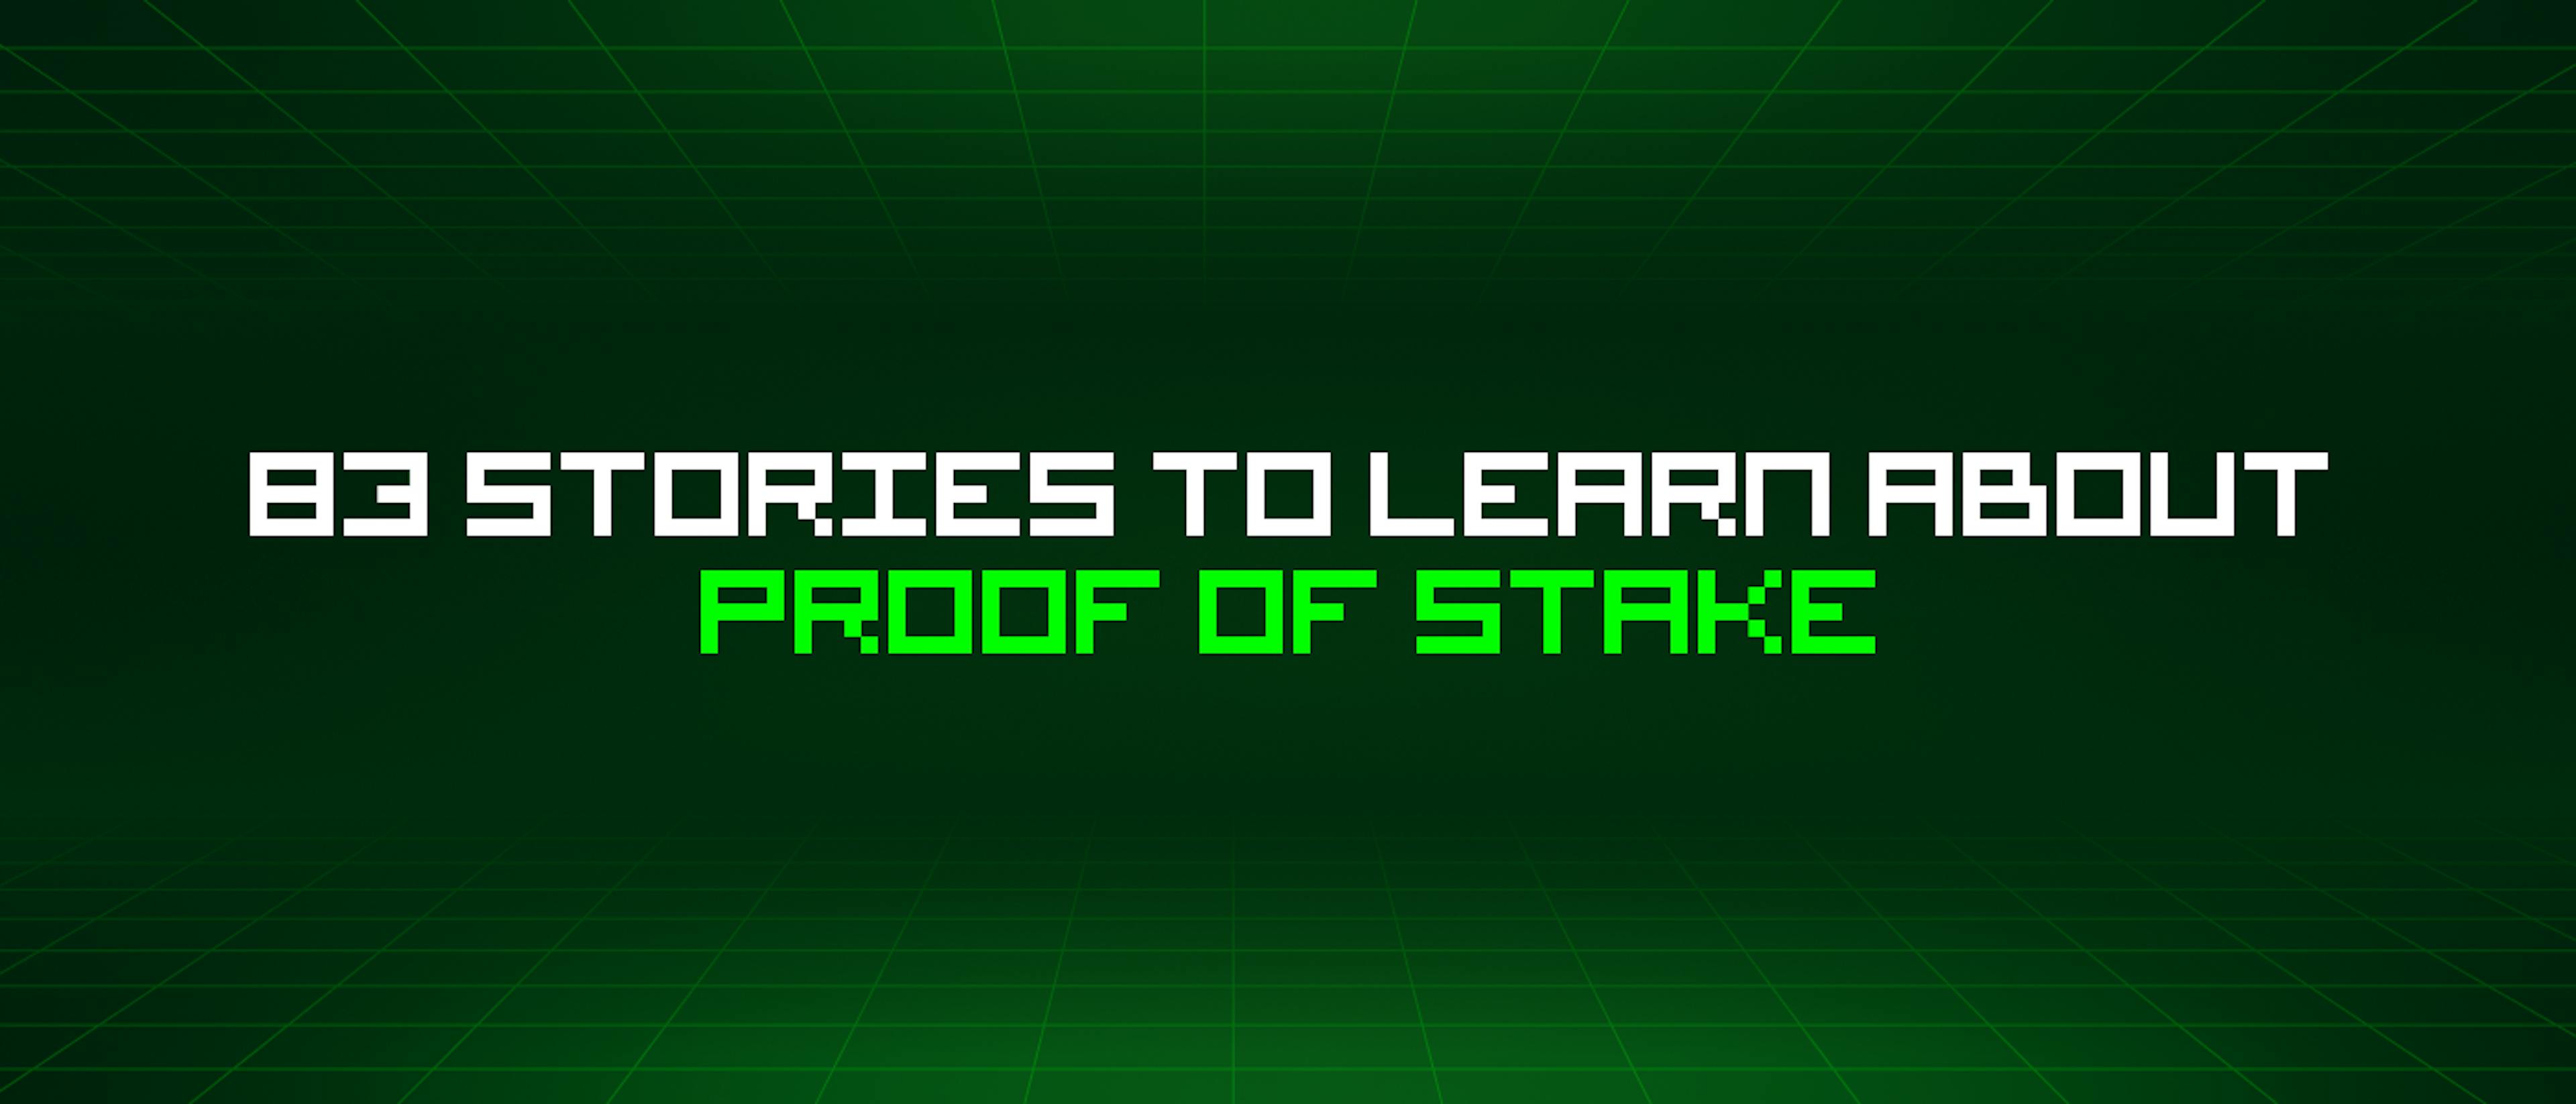 featured image - 83 Stories To Learn About Proof Of Stake